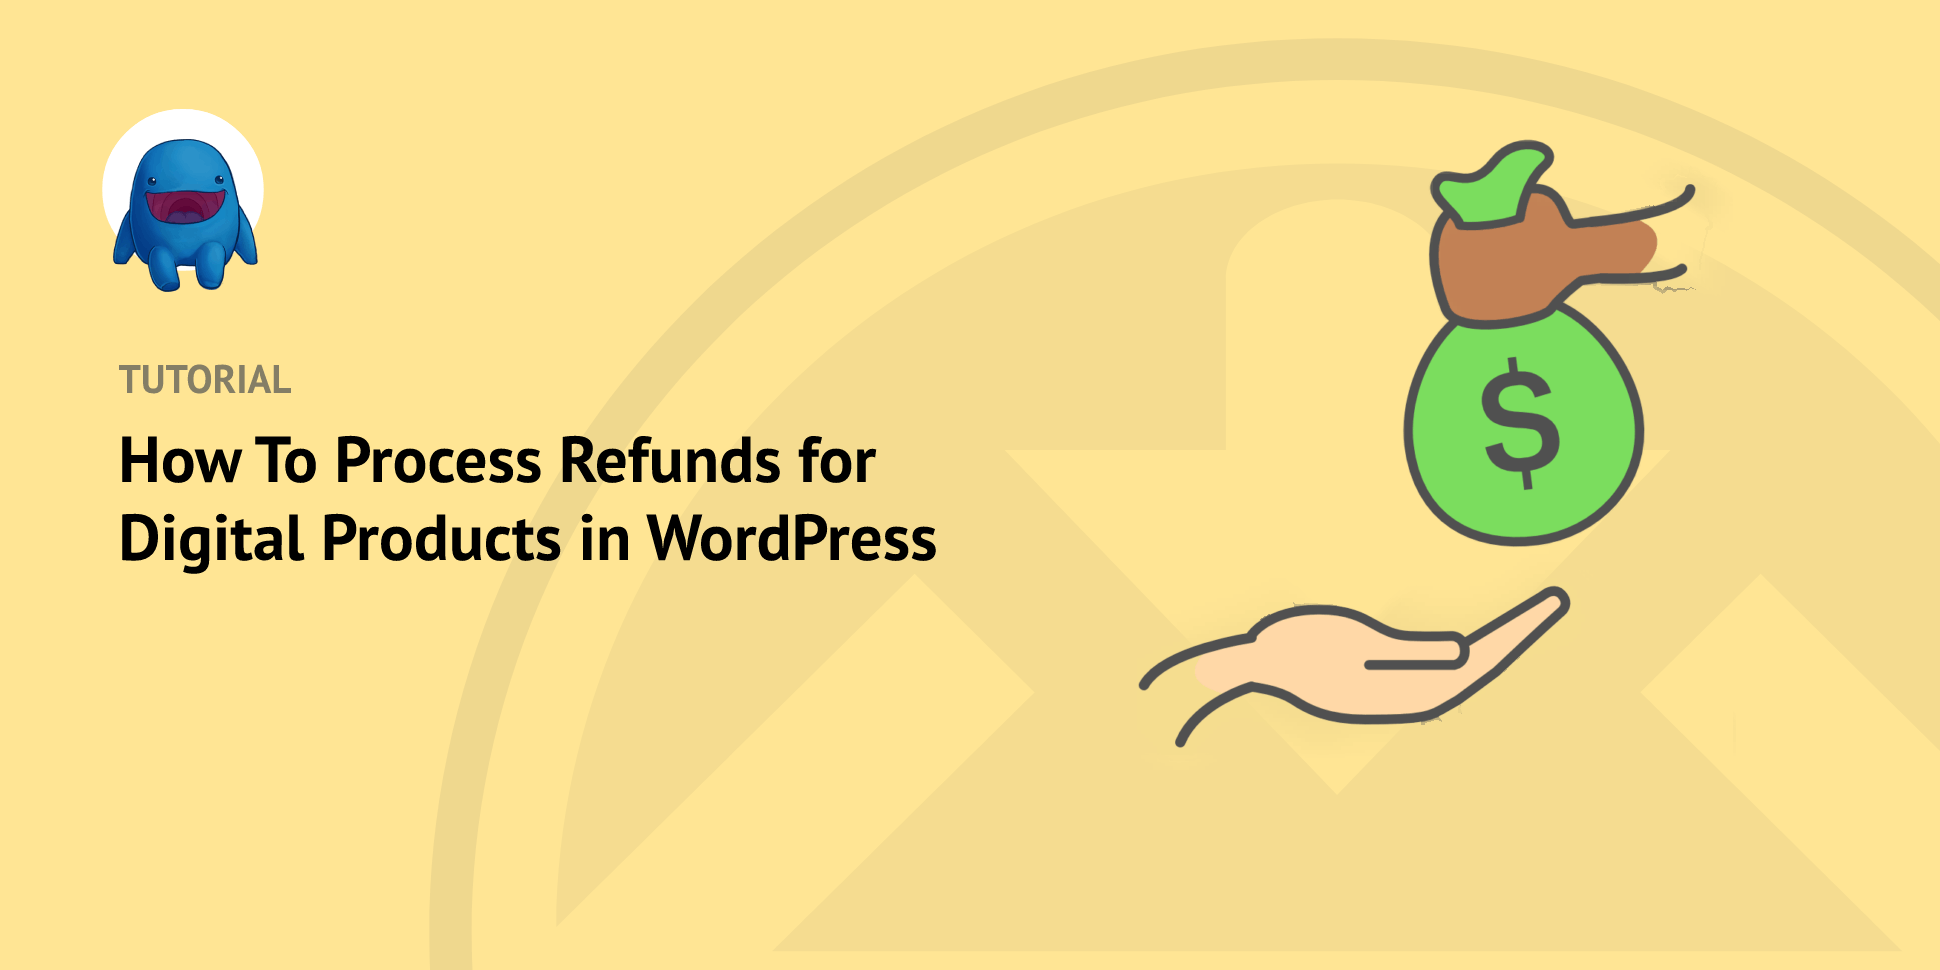 How to Process Refunds for Digital Products in WordPress